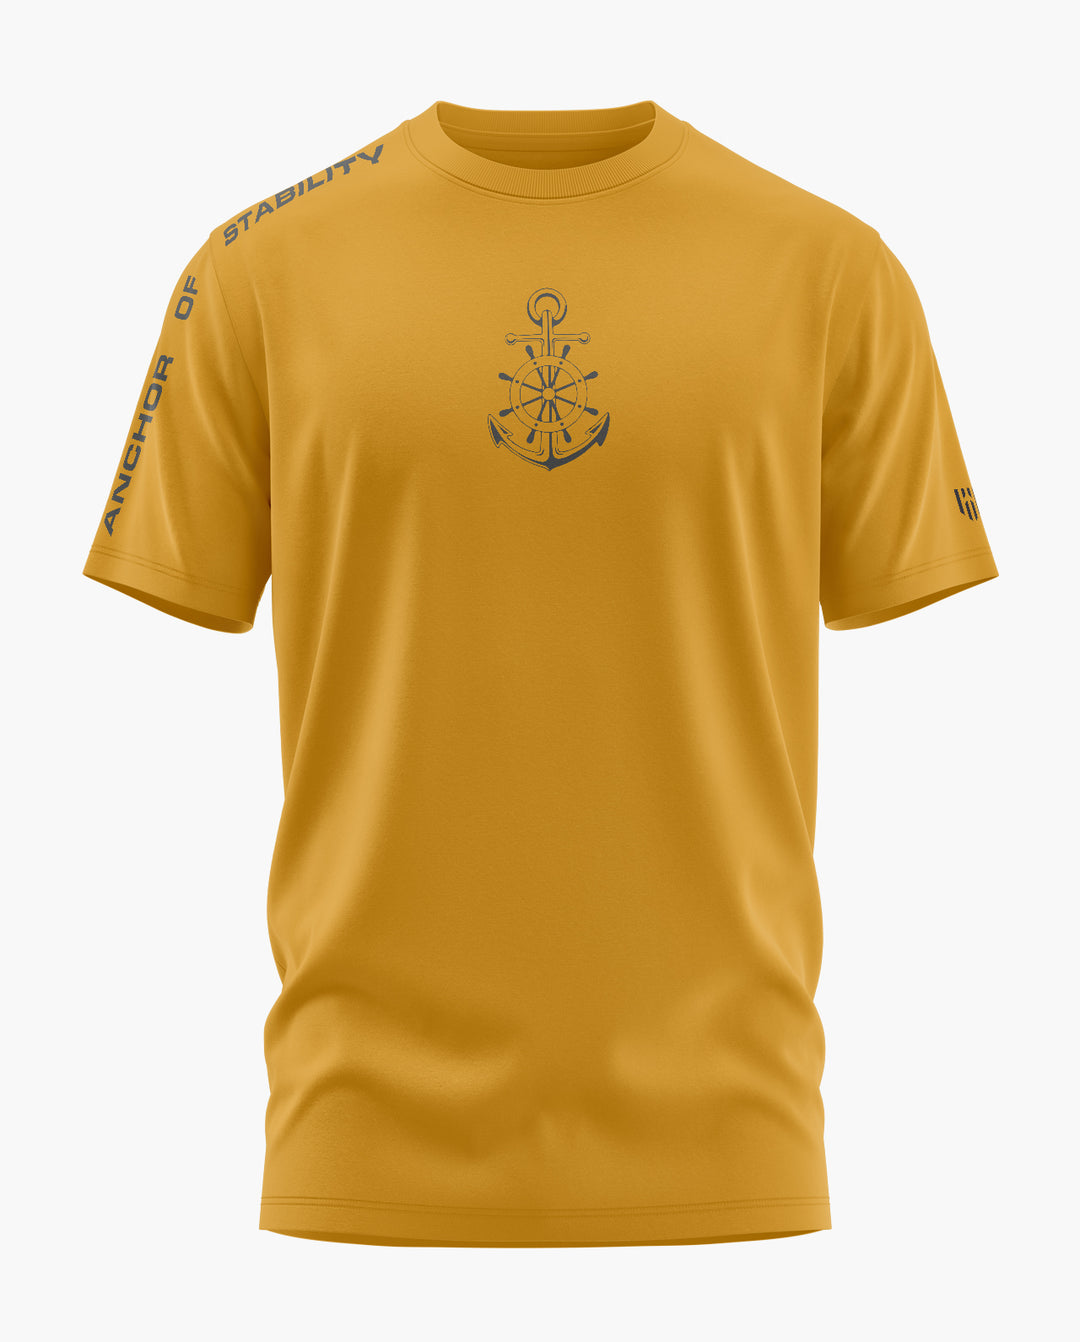 ANCHOR OF STABILITY T-Shirt